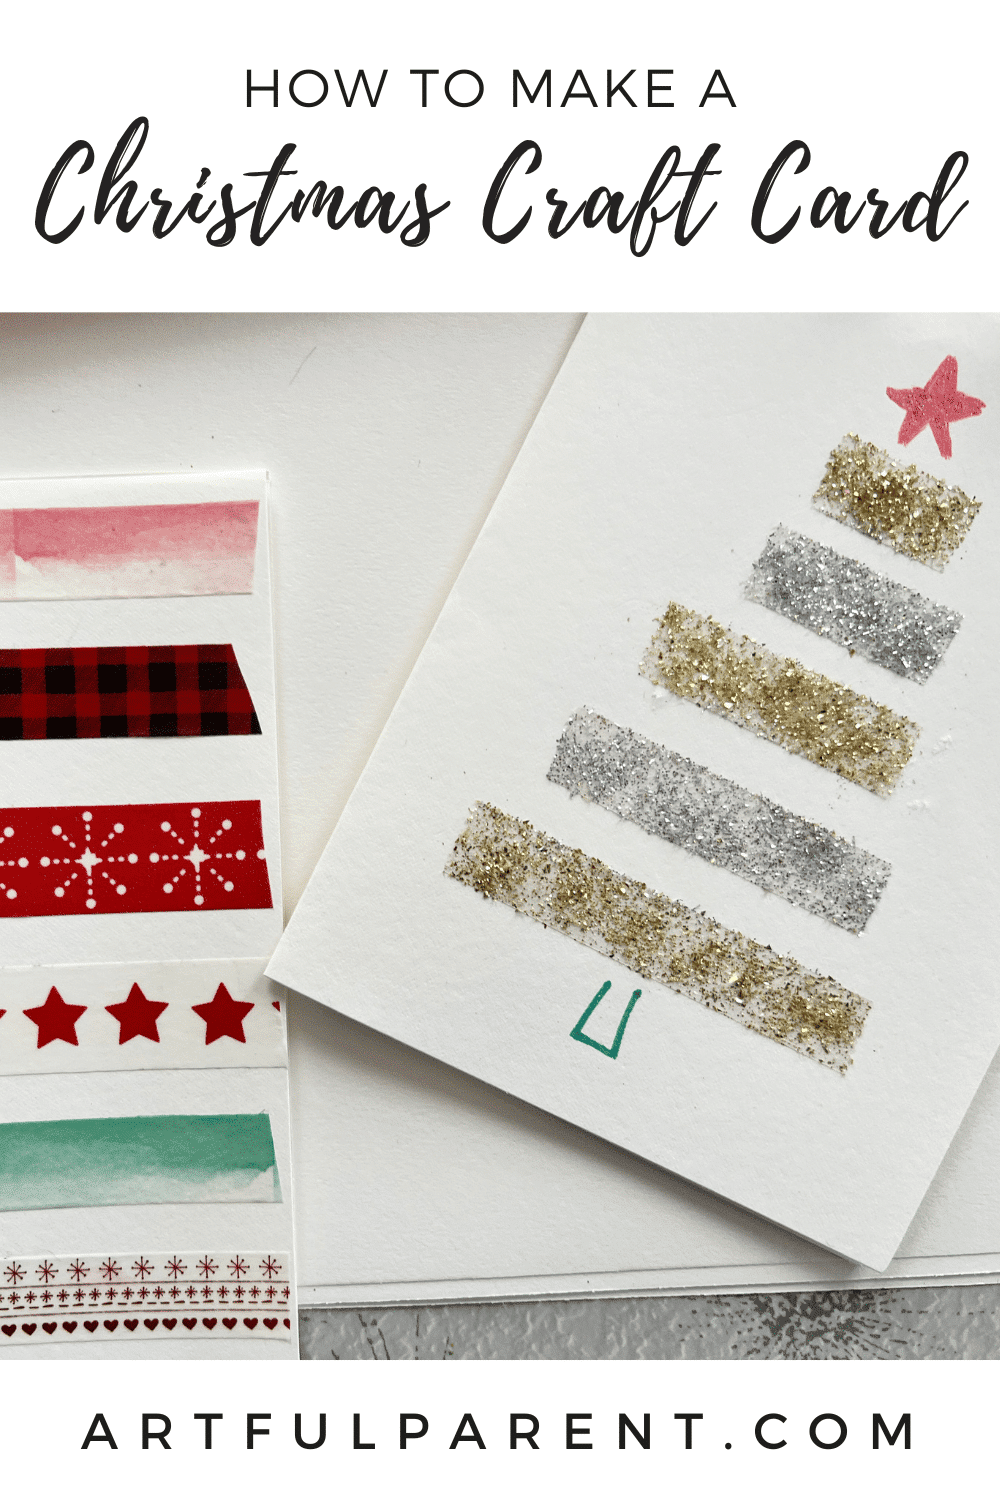 How to Make a Christmas Craft Card with Washi Tape